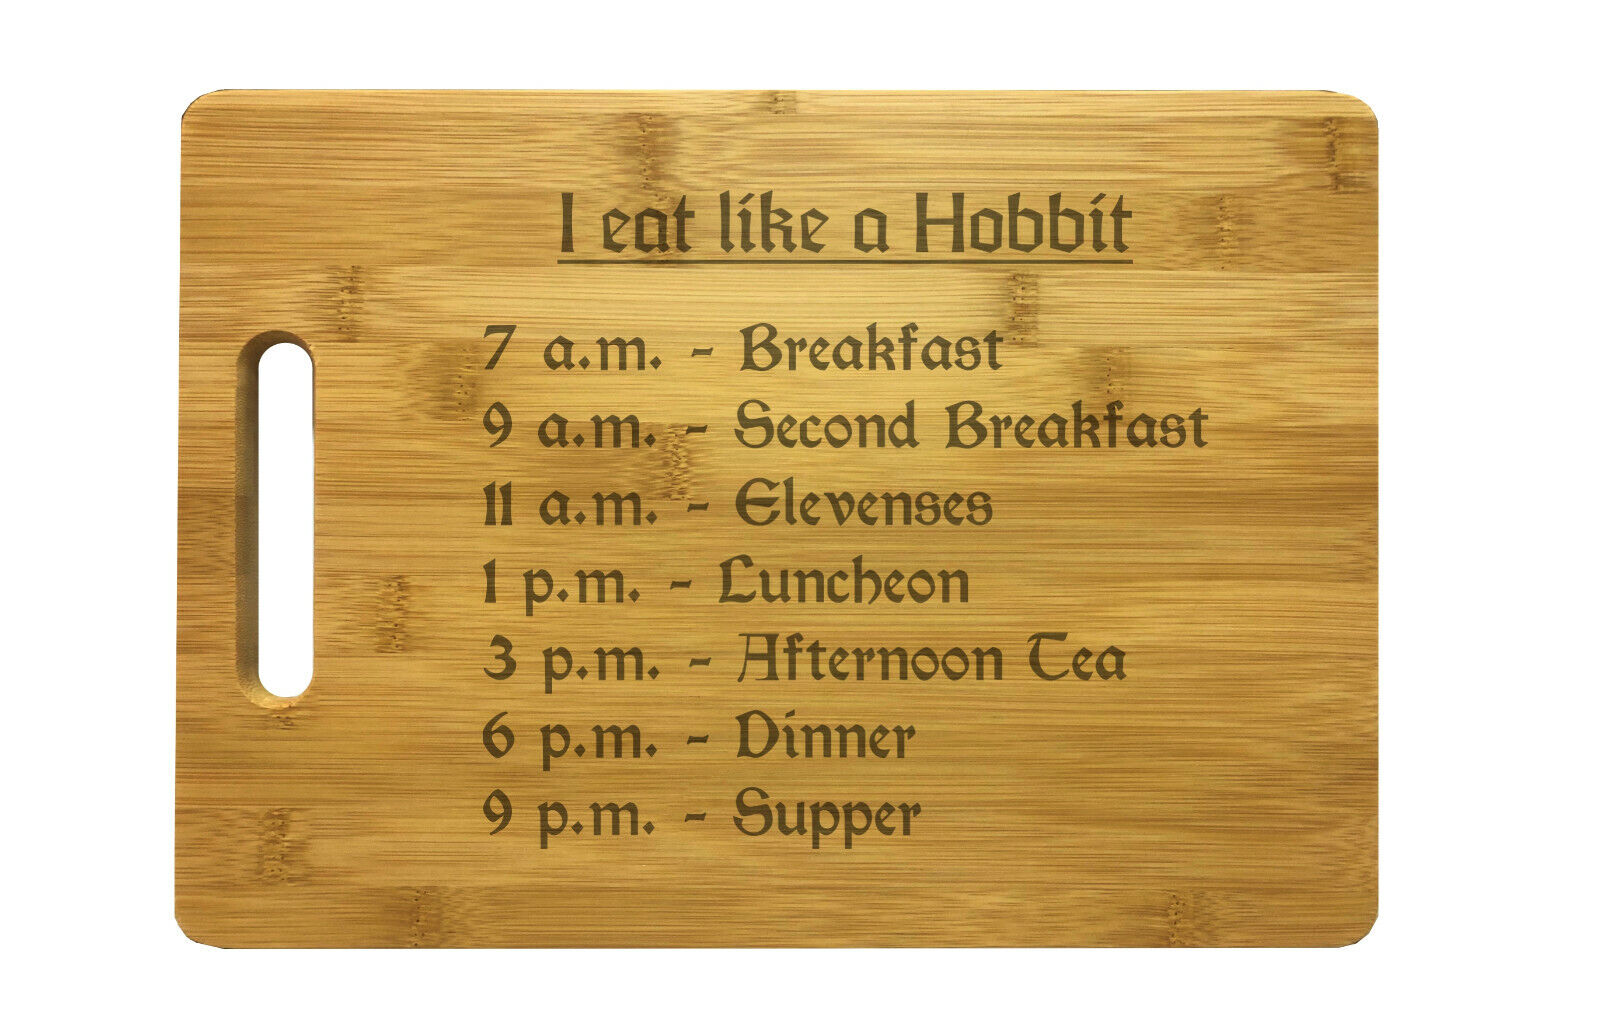 Hobbit Mealtimes: A Whimsical Twist On Traditional Dining Hours!